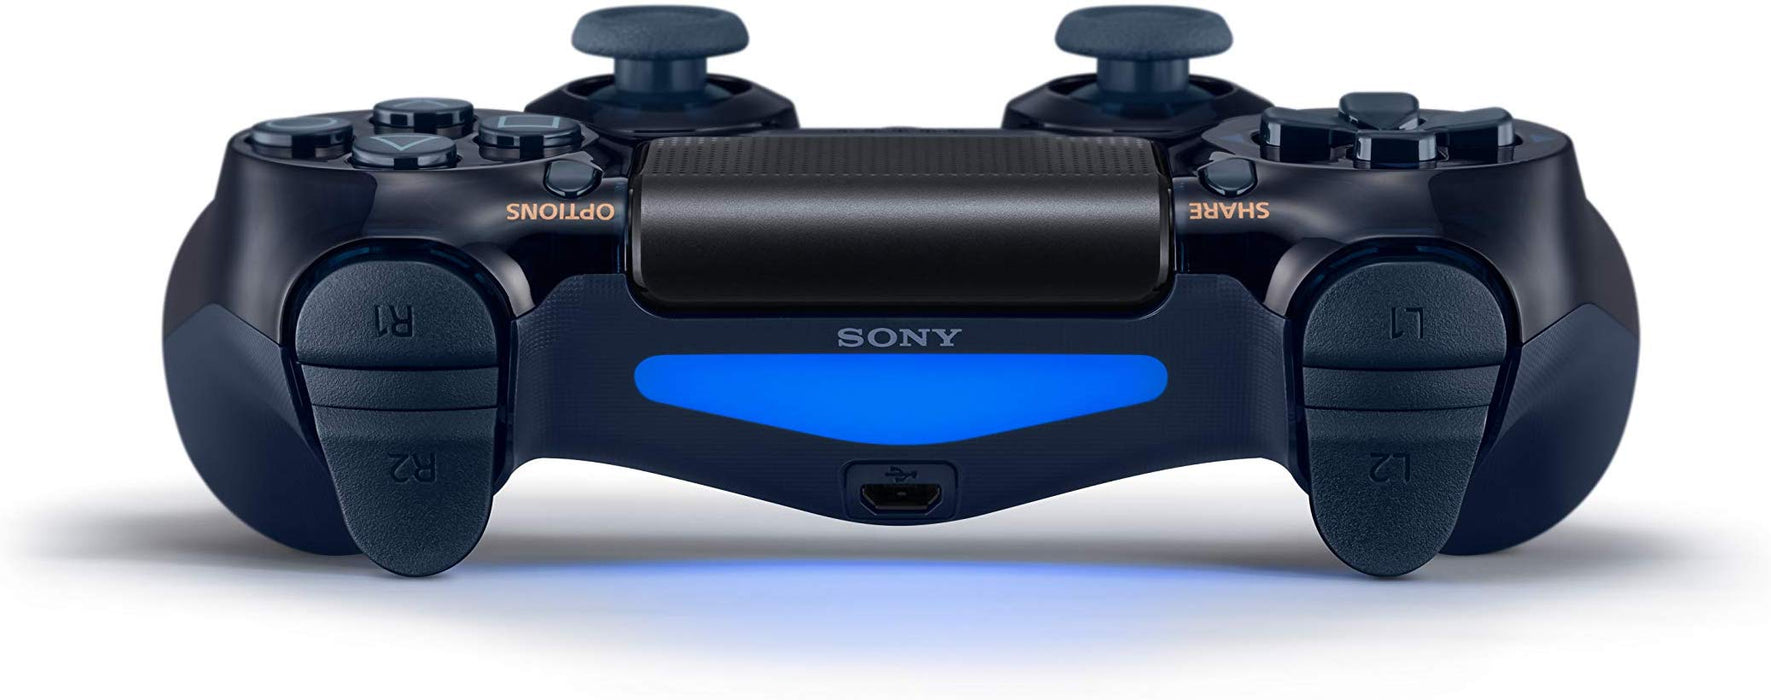 DualShock 4 Wireless Controller - 500 Million Limited Edition [PlayStation 4 Accessory]